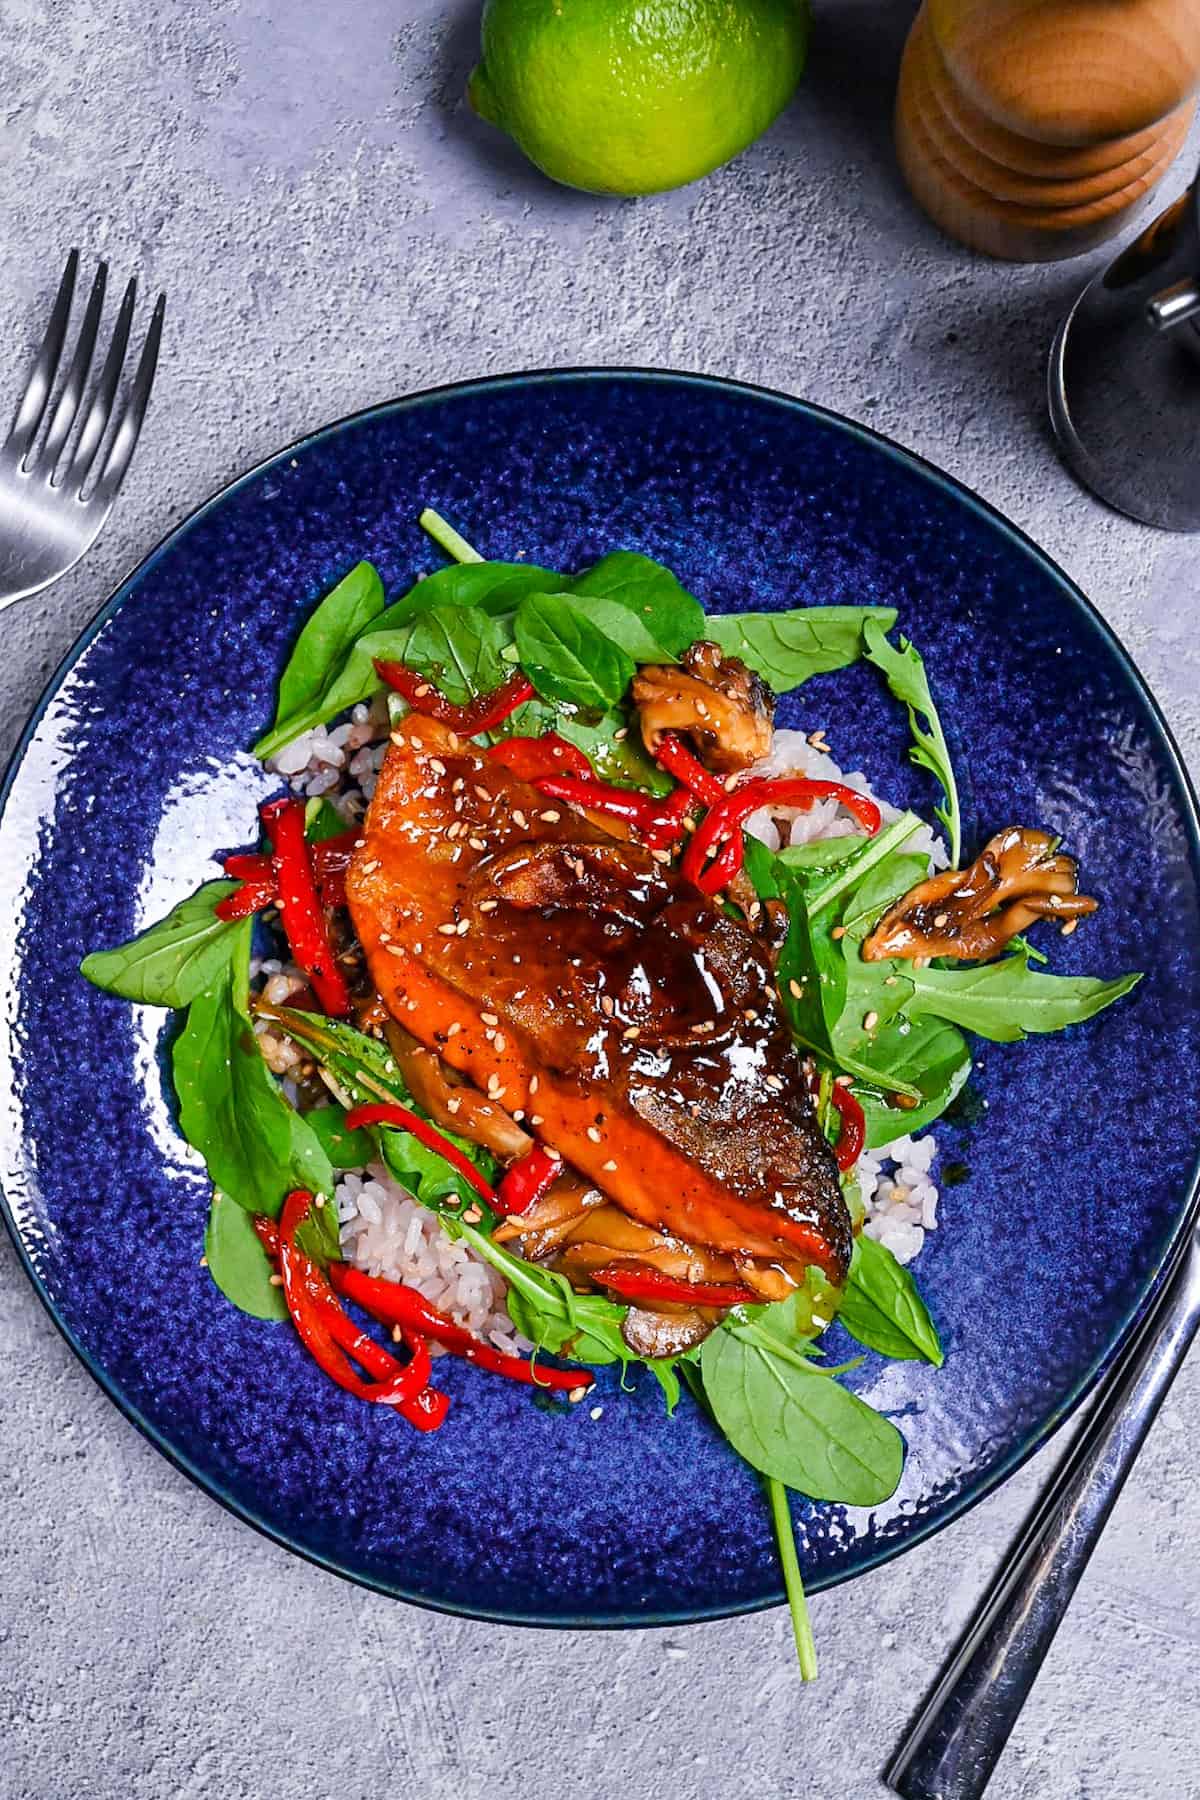 Ponzu salmon served with baby leaf, sautéed bell peppers and mushrooms over mixed grain rice on a blue plate